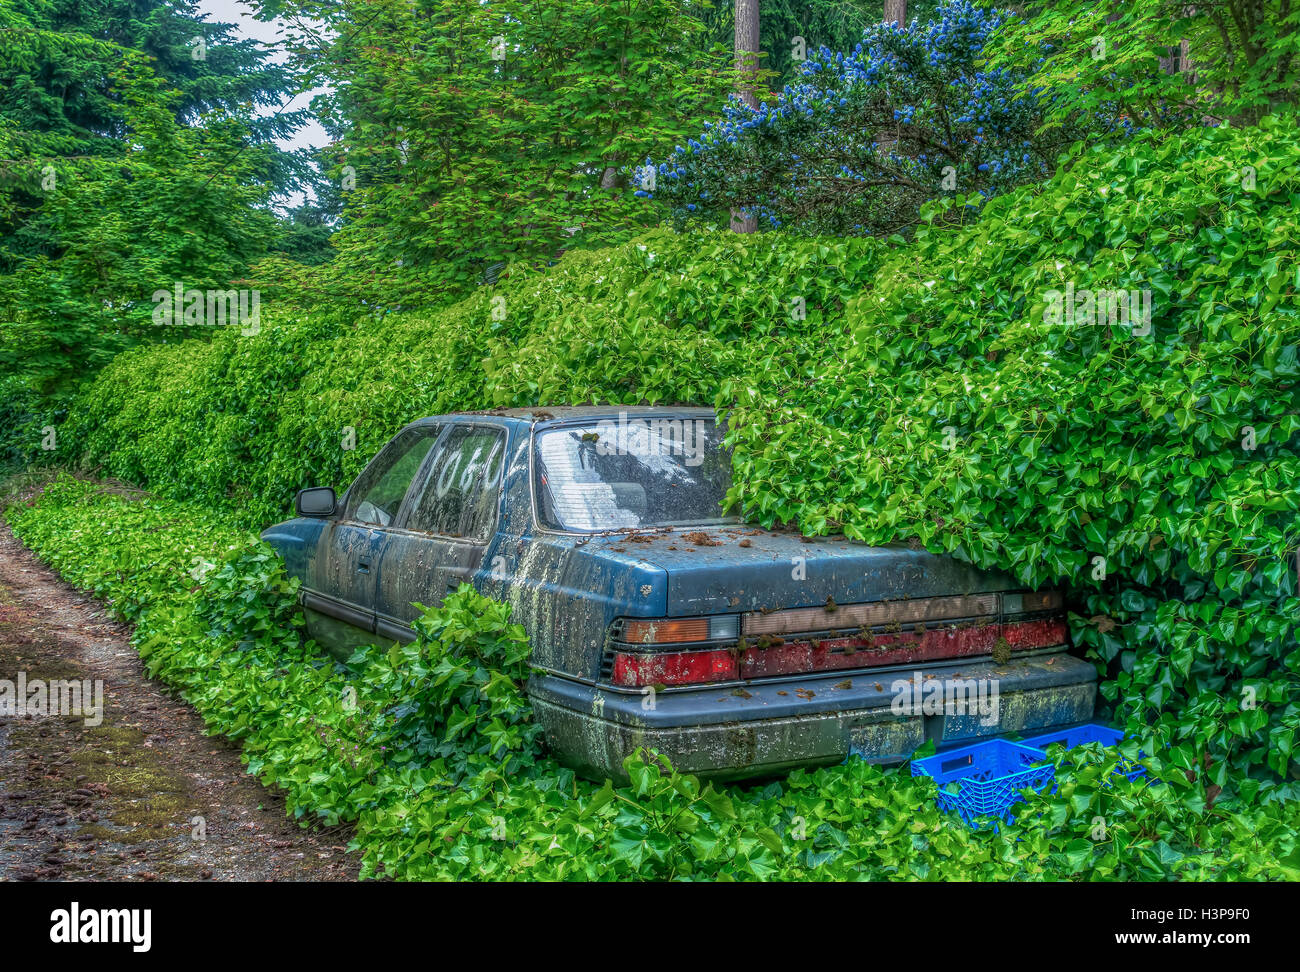 An old abandoned car in being overtaken by nature. High Dynamic Range image. Stock Photo